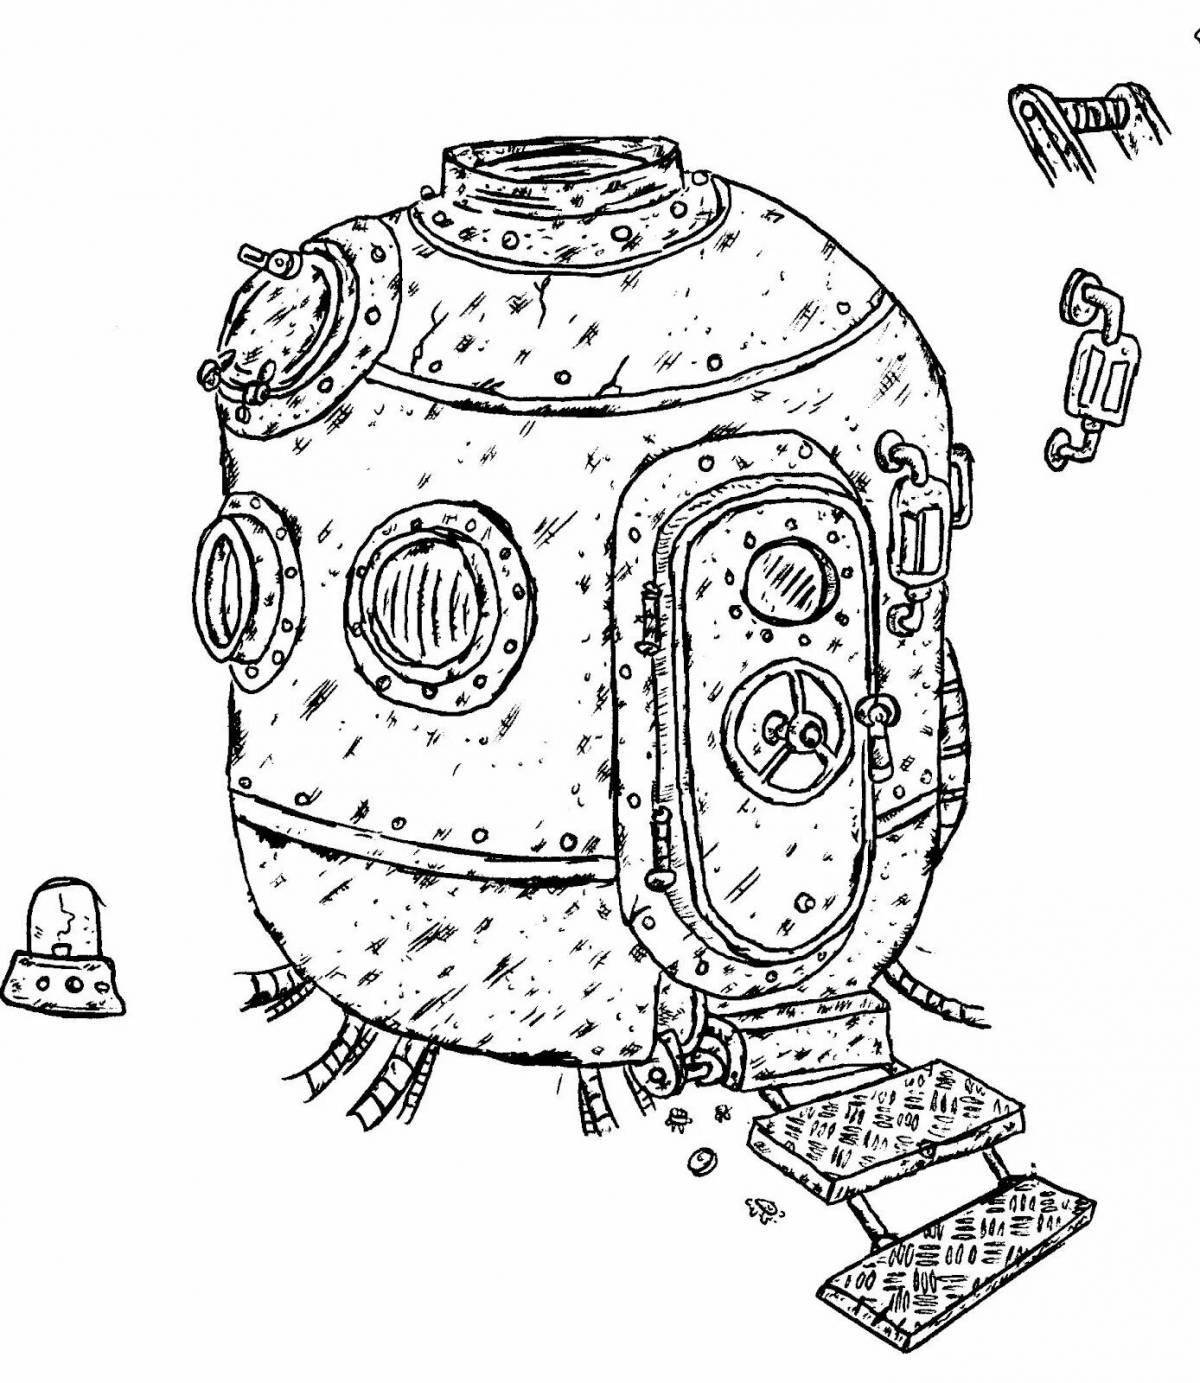 Exquisite Time Machine Coloring Page